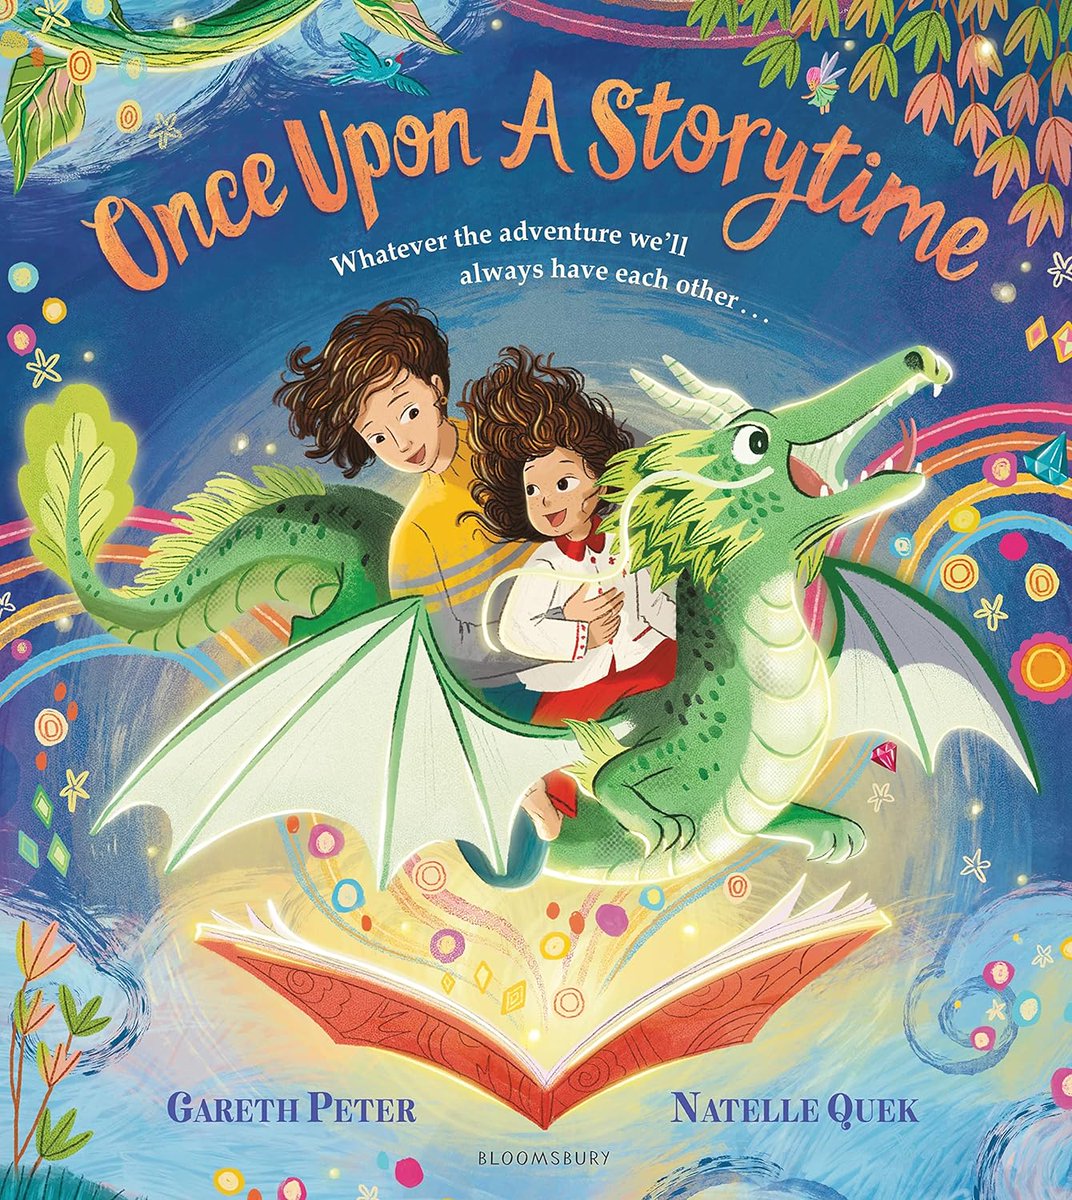 Settle down at bedtime with @PurpleHuskey & @NatelleQuek’s Once Upon a Storytime & transport little ones to dazzling, dreamy adventures! @TheEmilyRose @KidsBloomsbury pamnorfolkblog.blogspot.com Review also @leponline later this week!